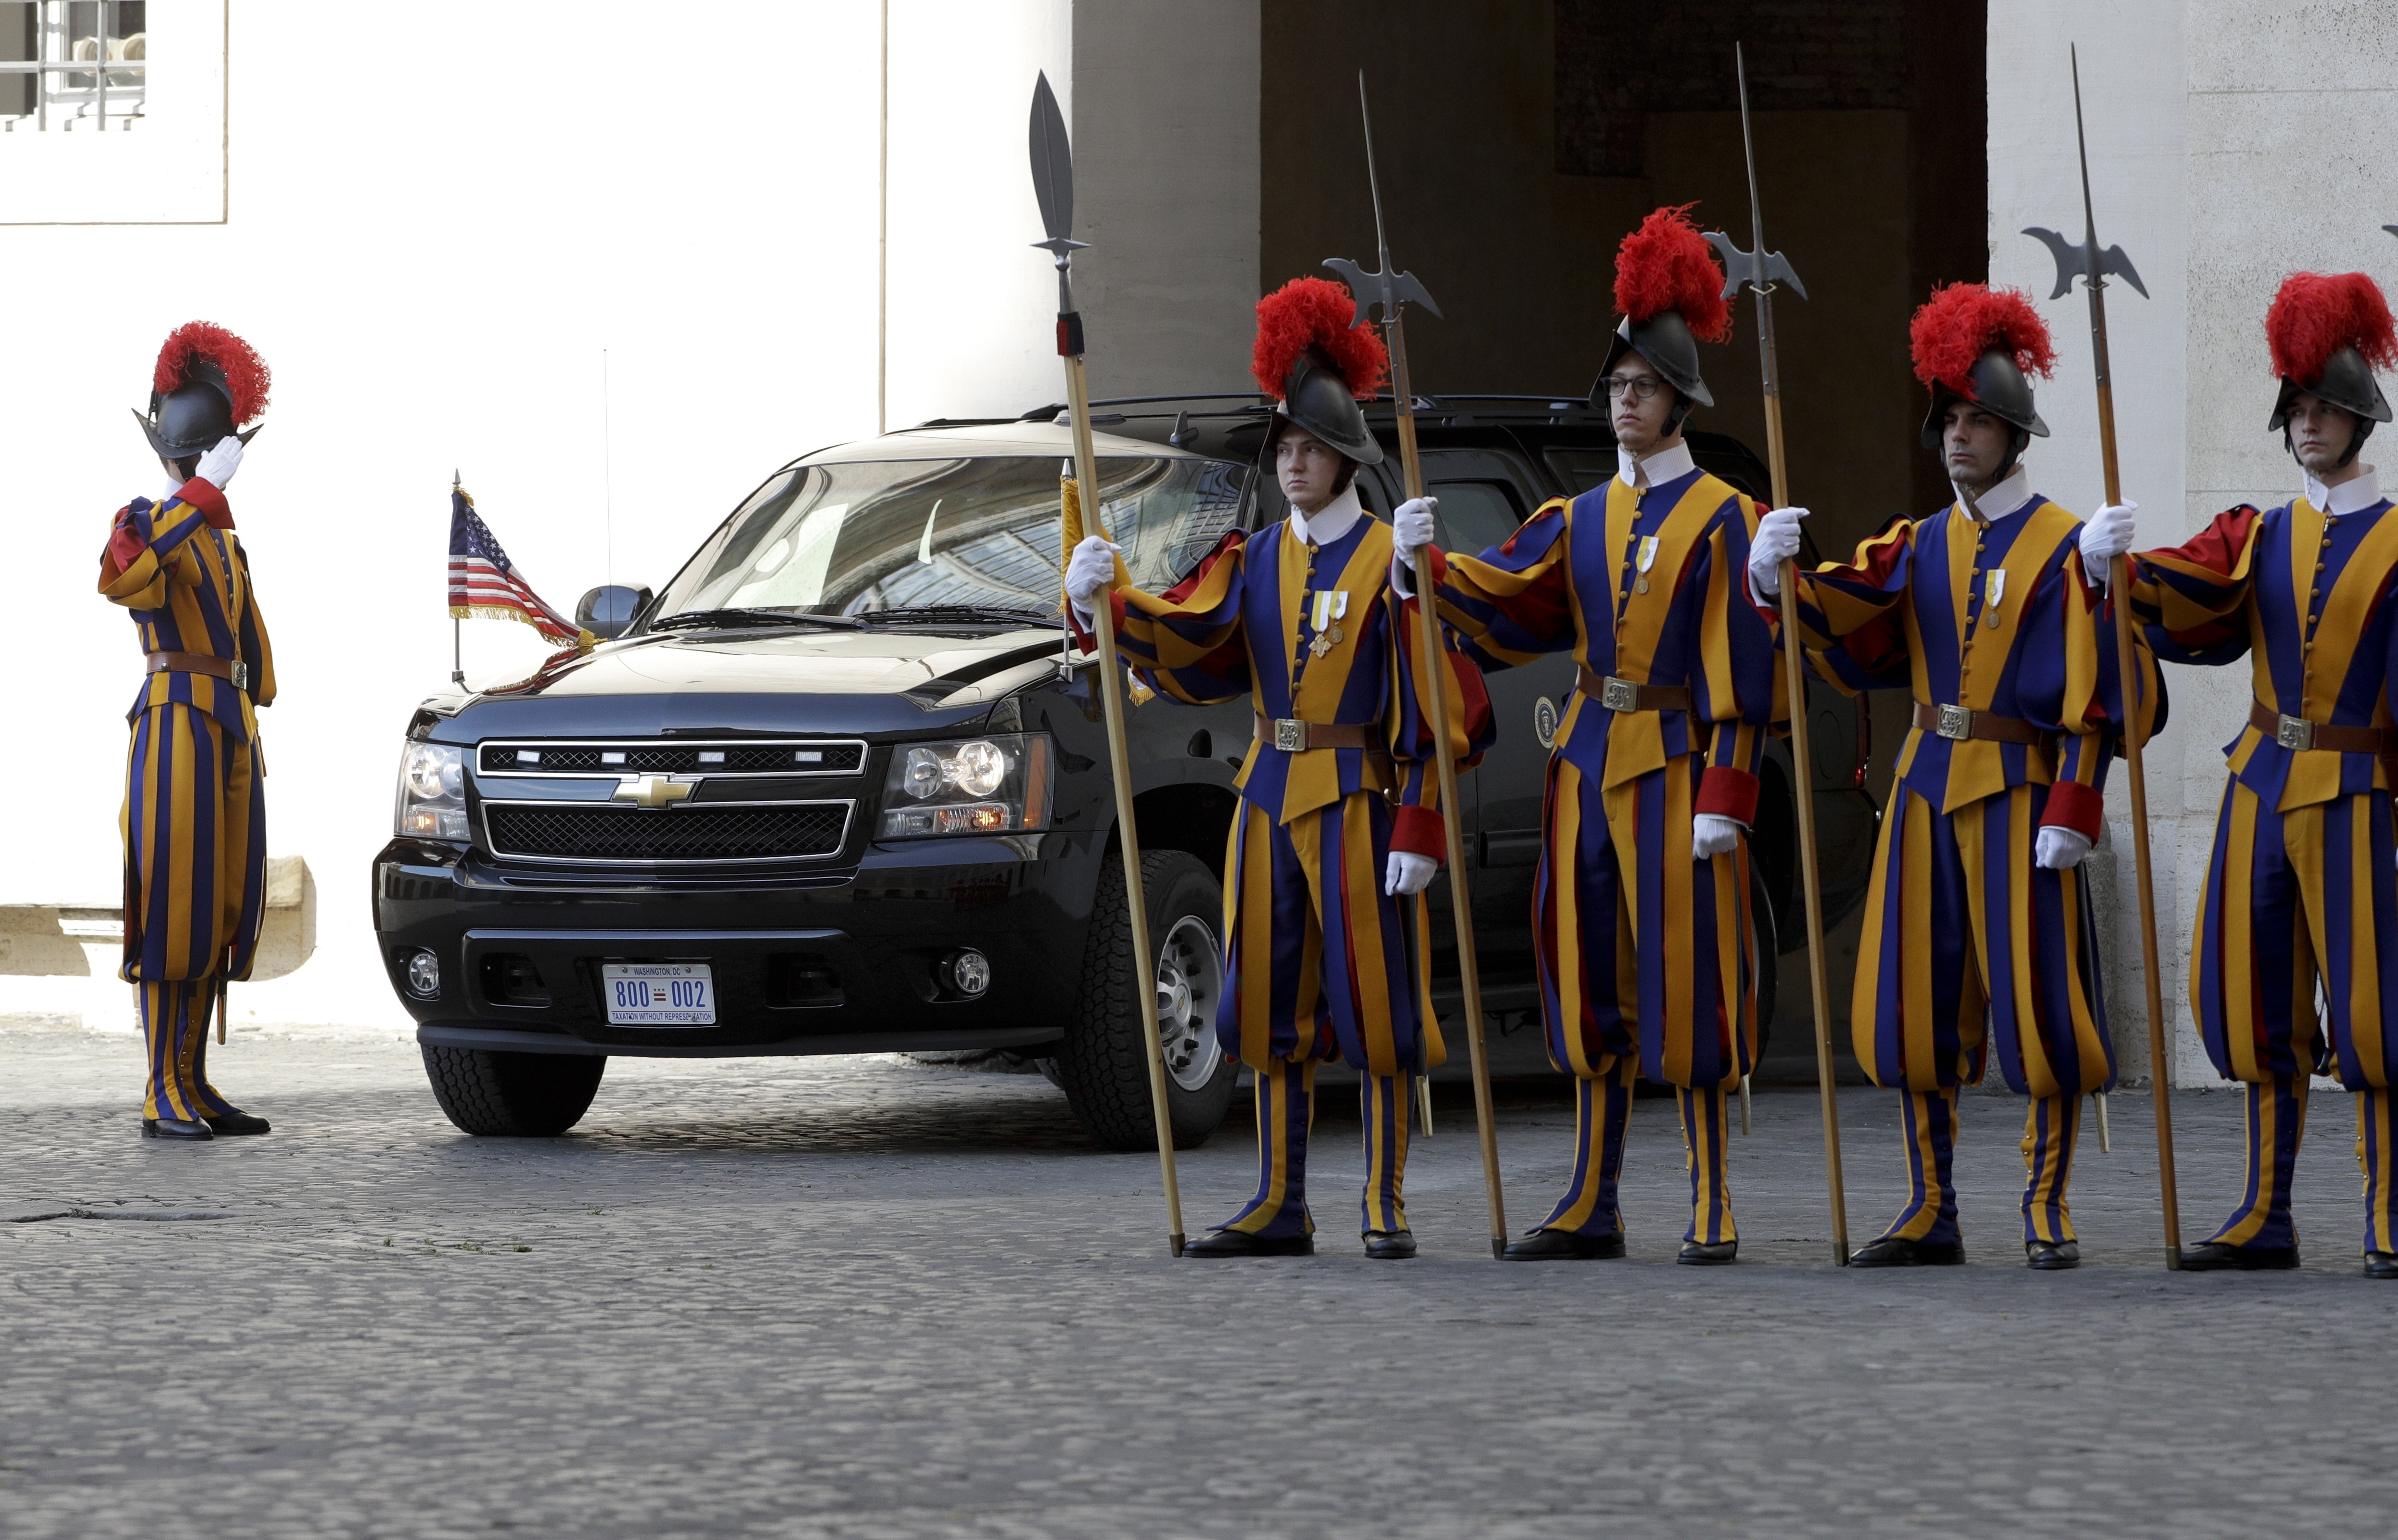 President Donald Trump's car arrives at the San Damaso courtyard for his private audience with Pope Francis, at the Vatican, Wednesday, May 24, 2017. (AP Photo/Gregorio Borgia)